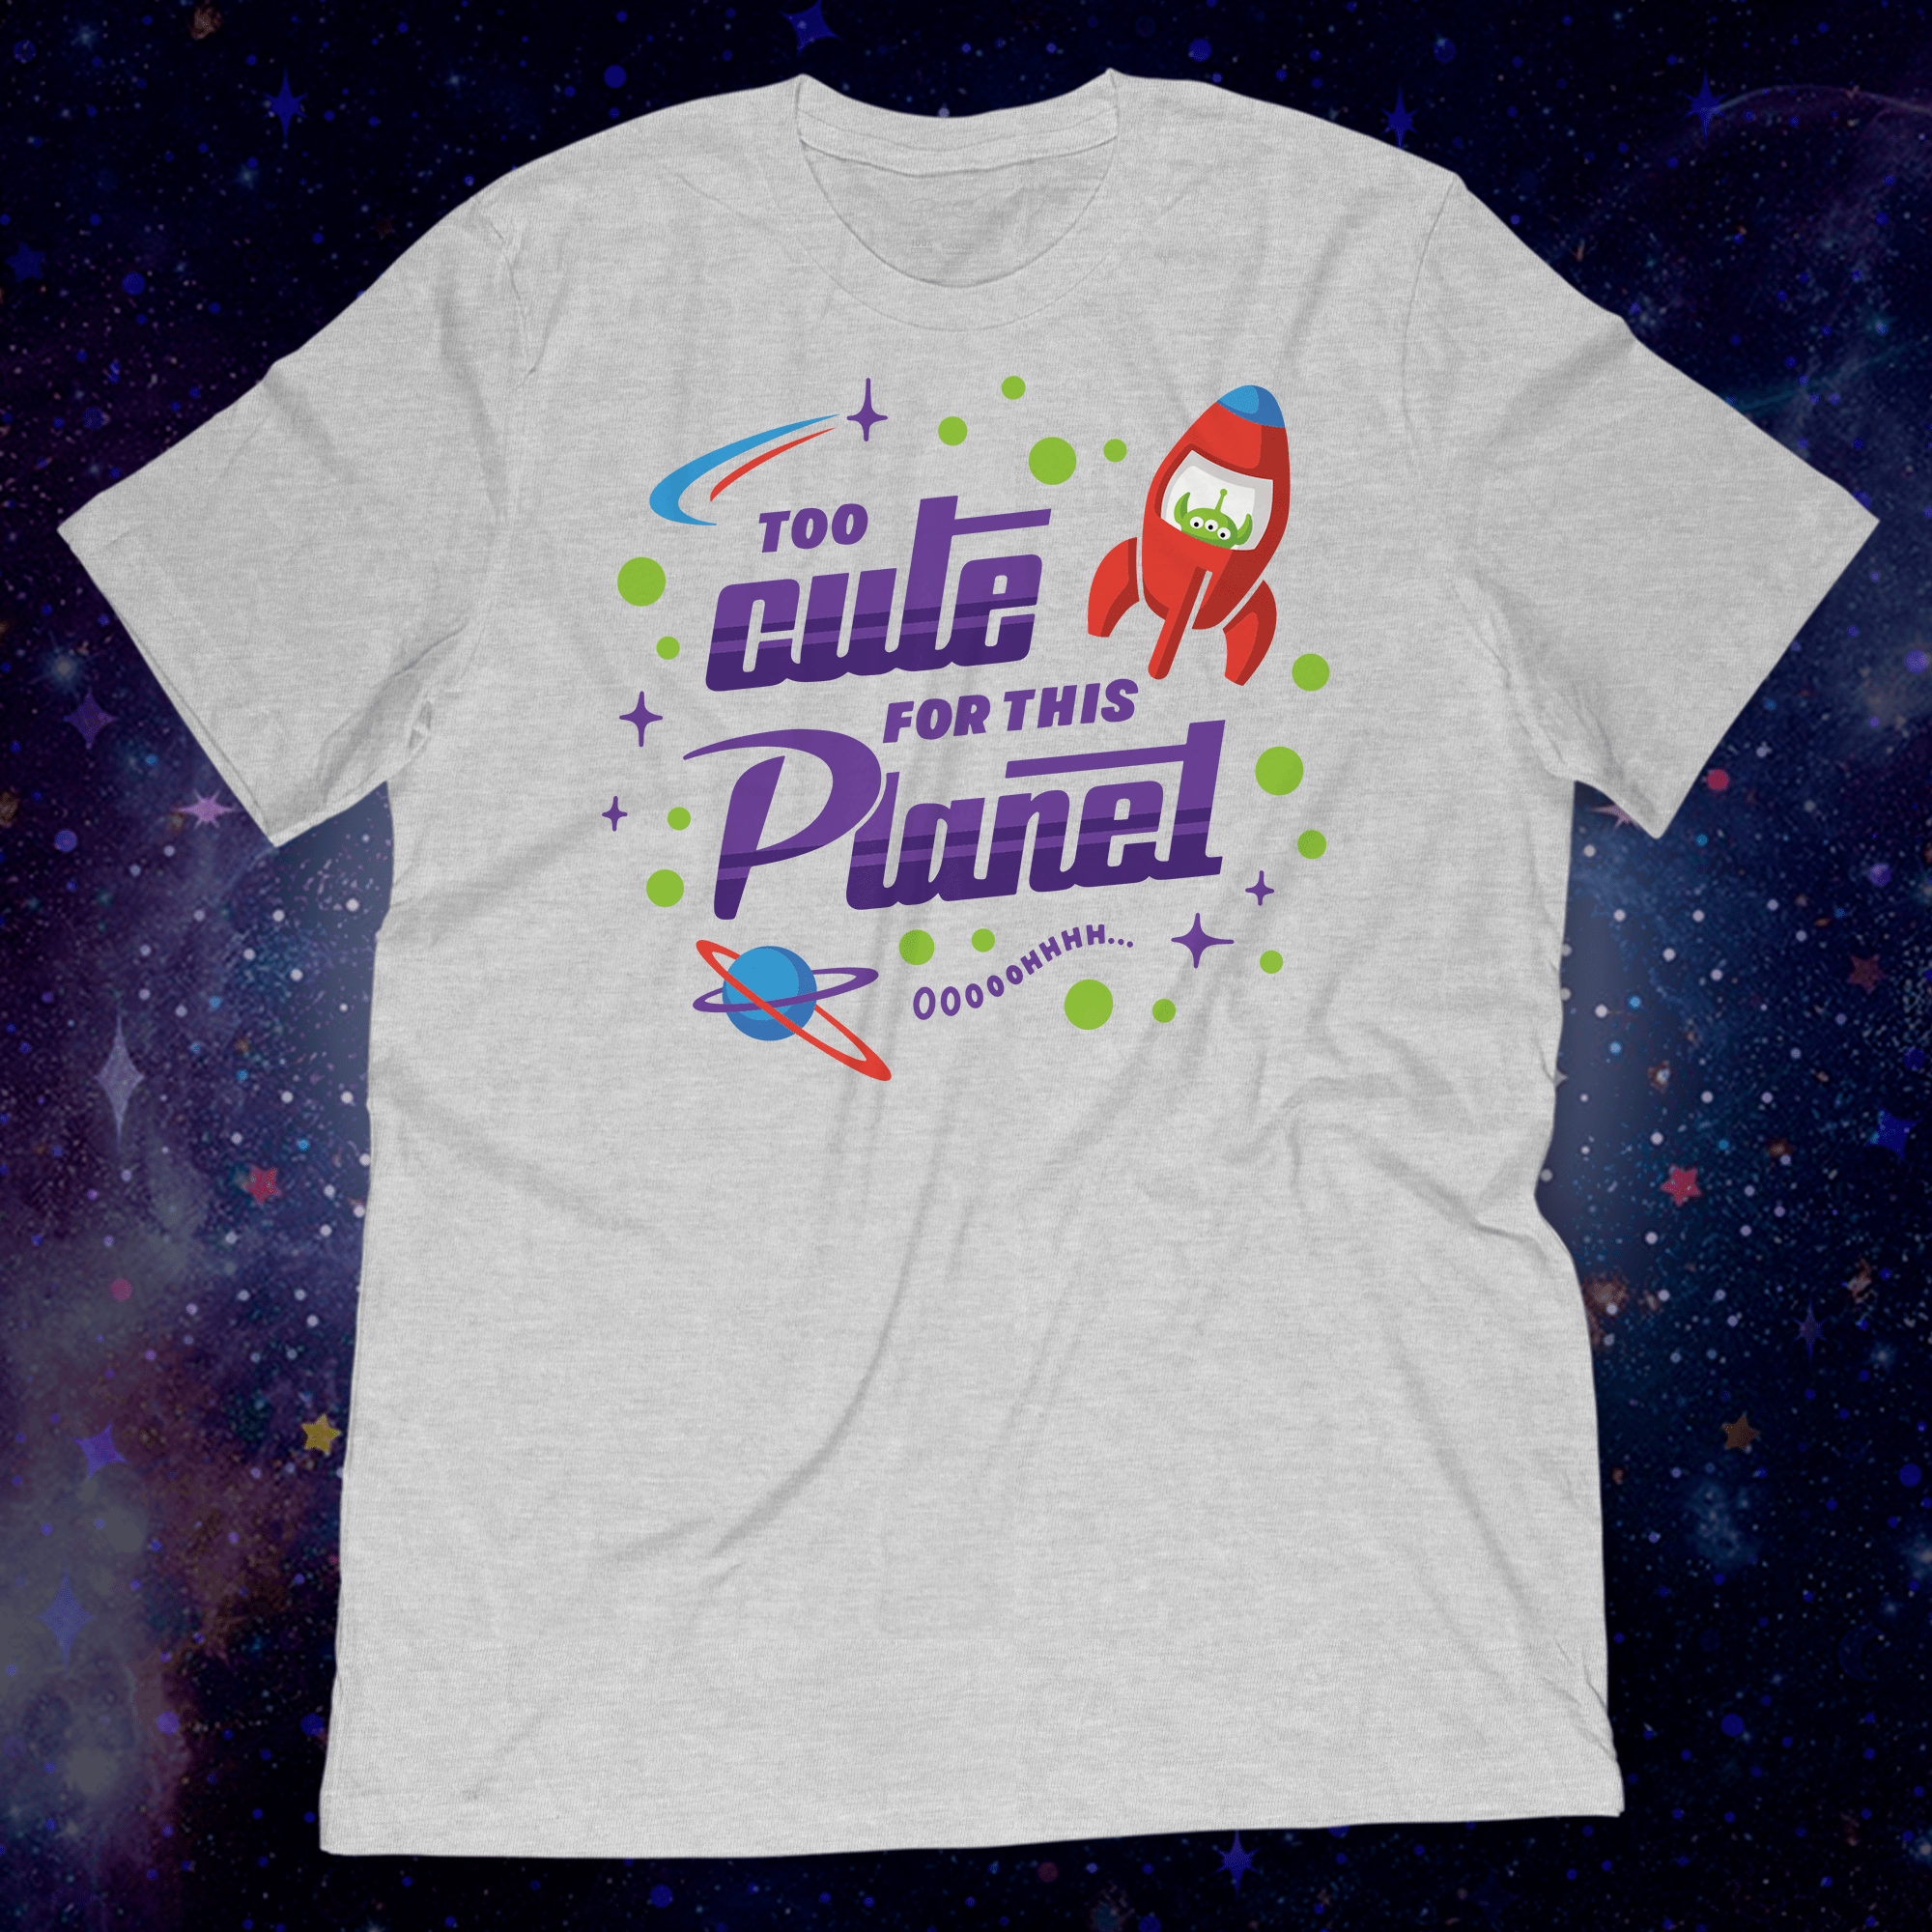 Too Cute for this Planet Shirt - Park Candy